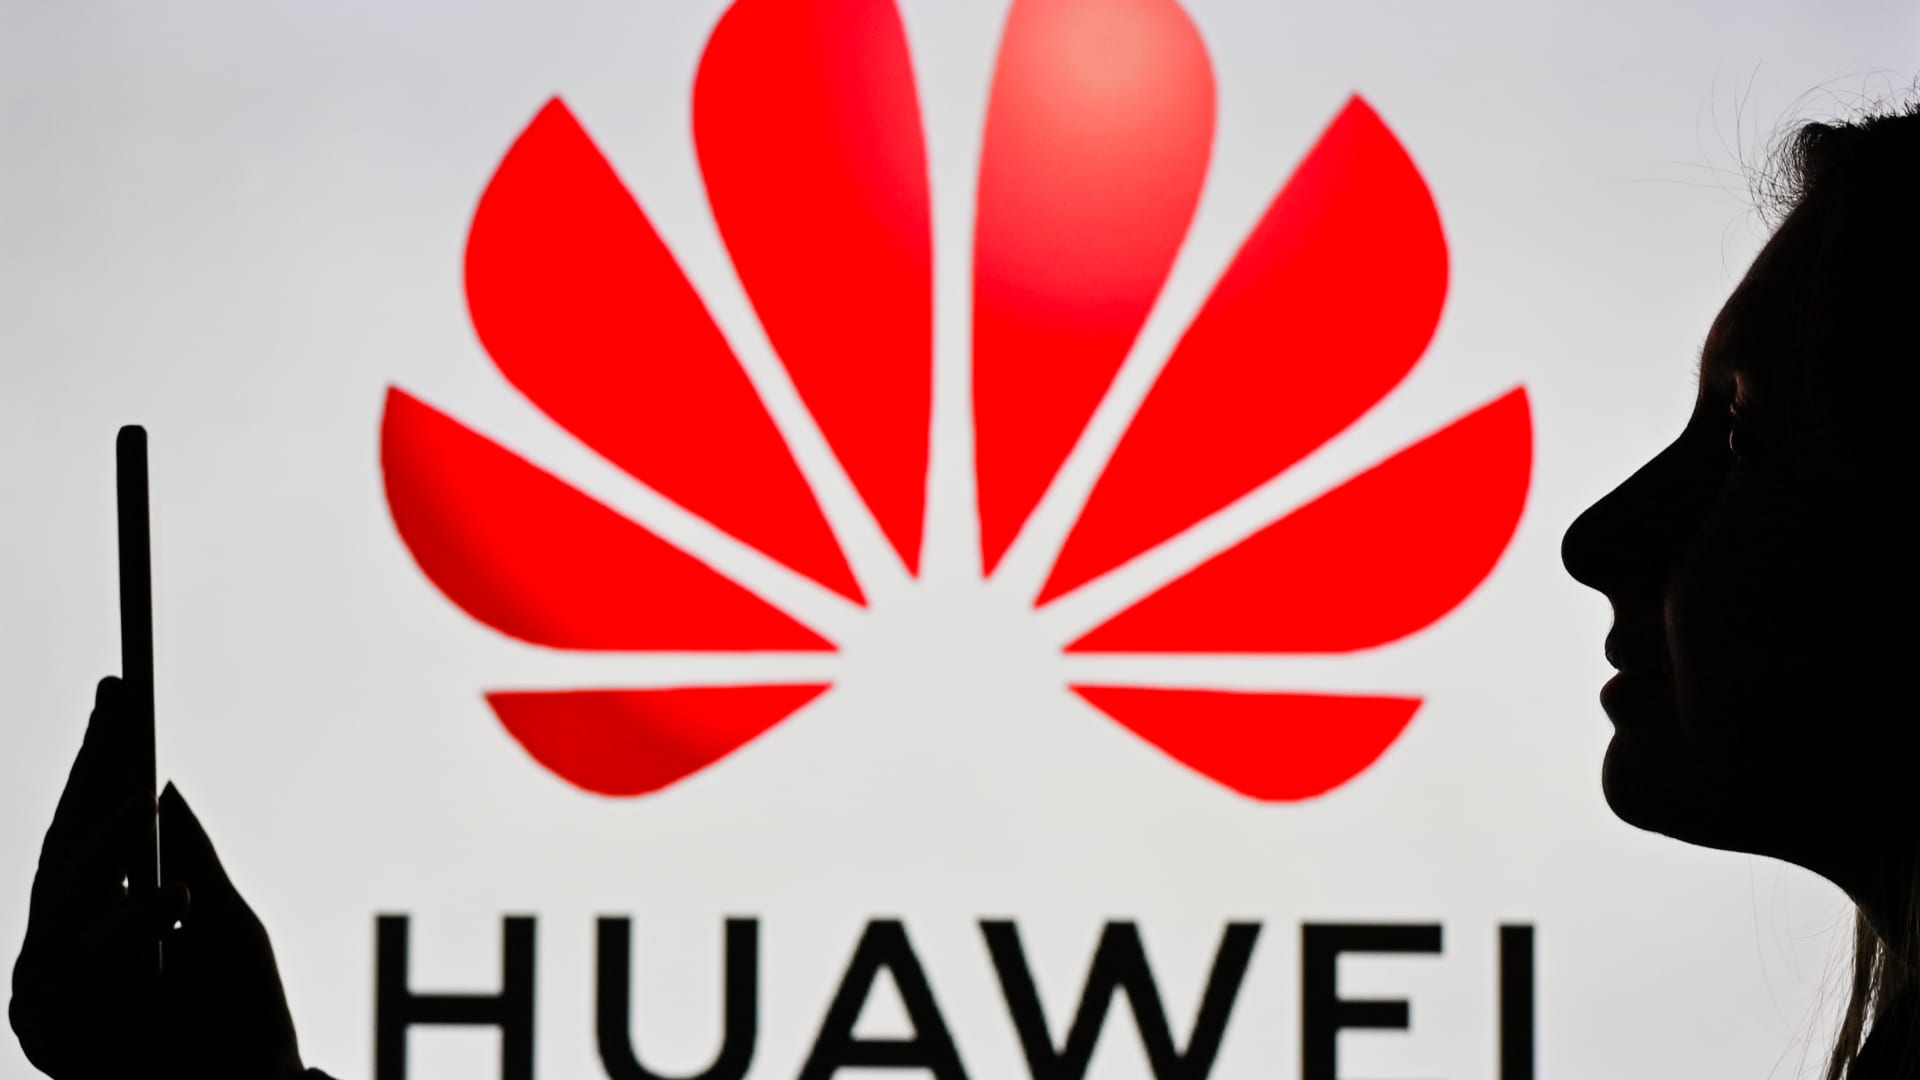 Huawei licenses 5G patents to rival as U.S. sanctions bite